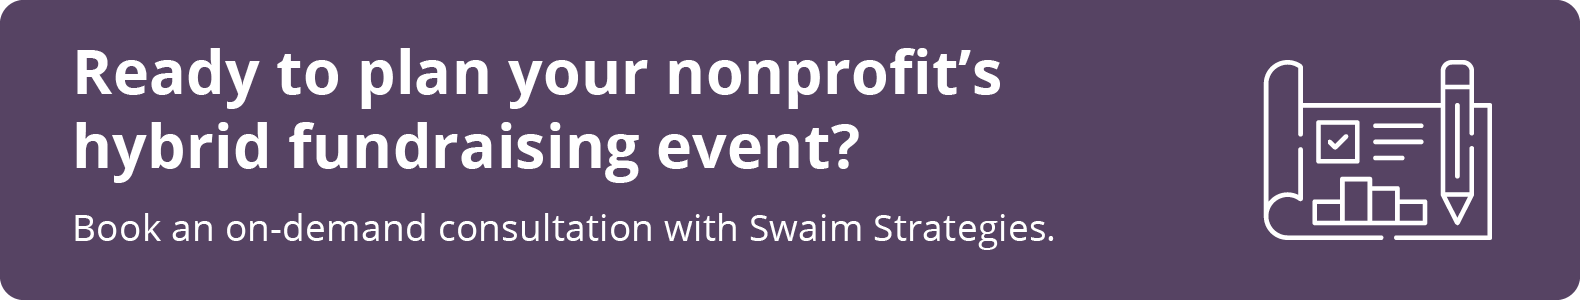 Click through to book a consultation with experts at Swaim Strategies for your next hybrid fundraising event.